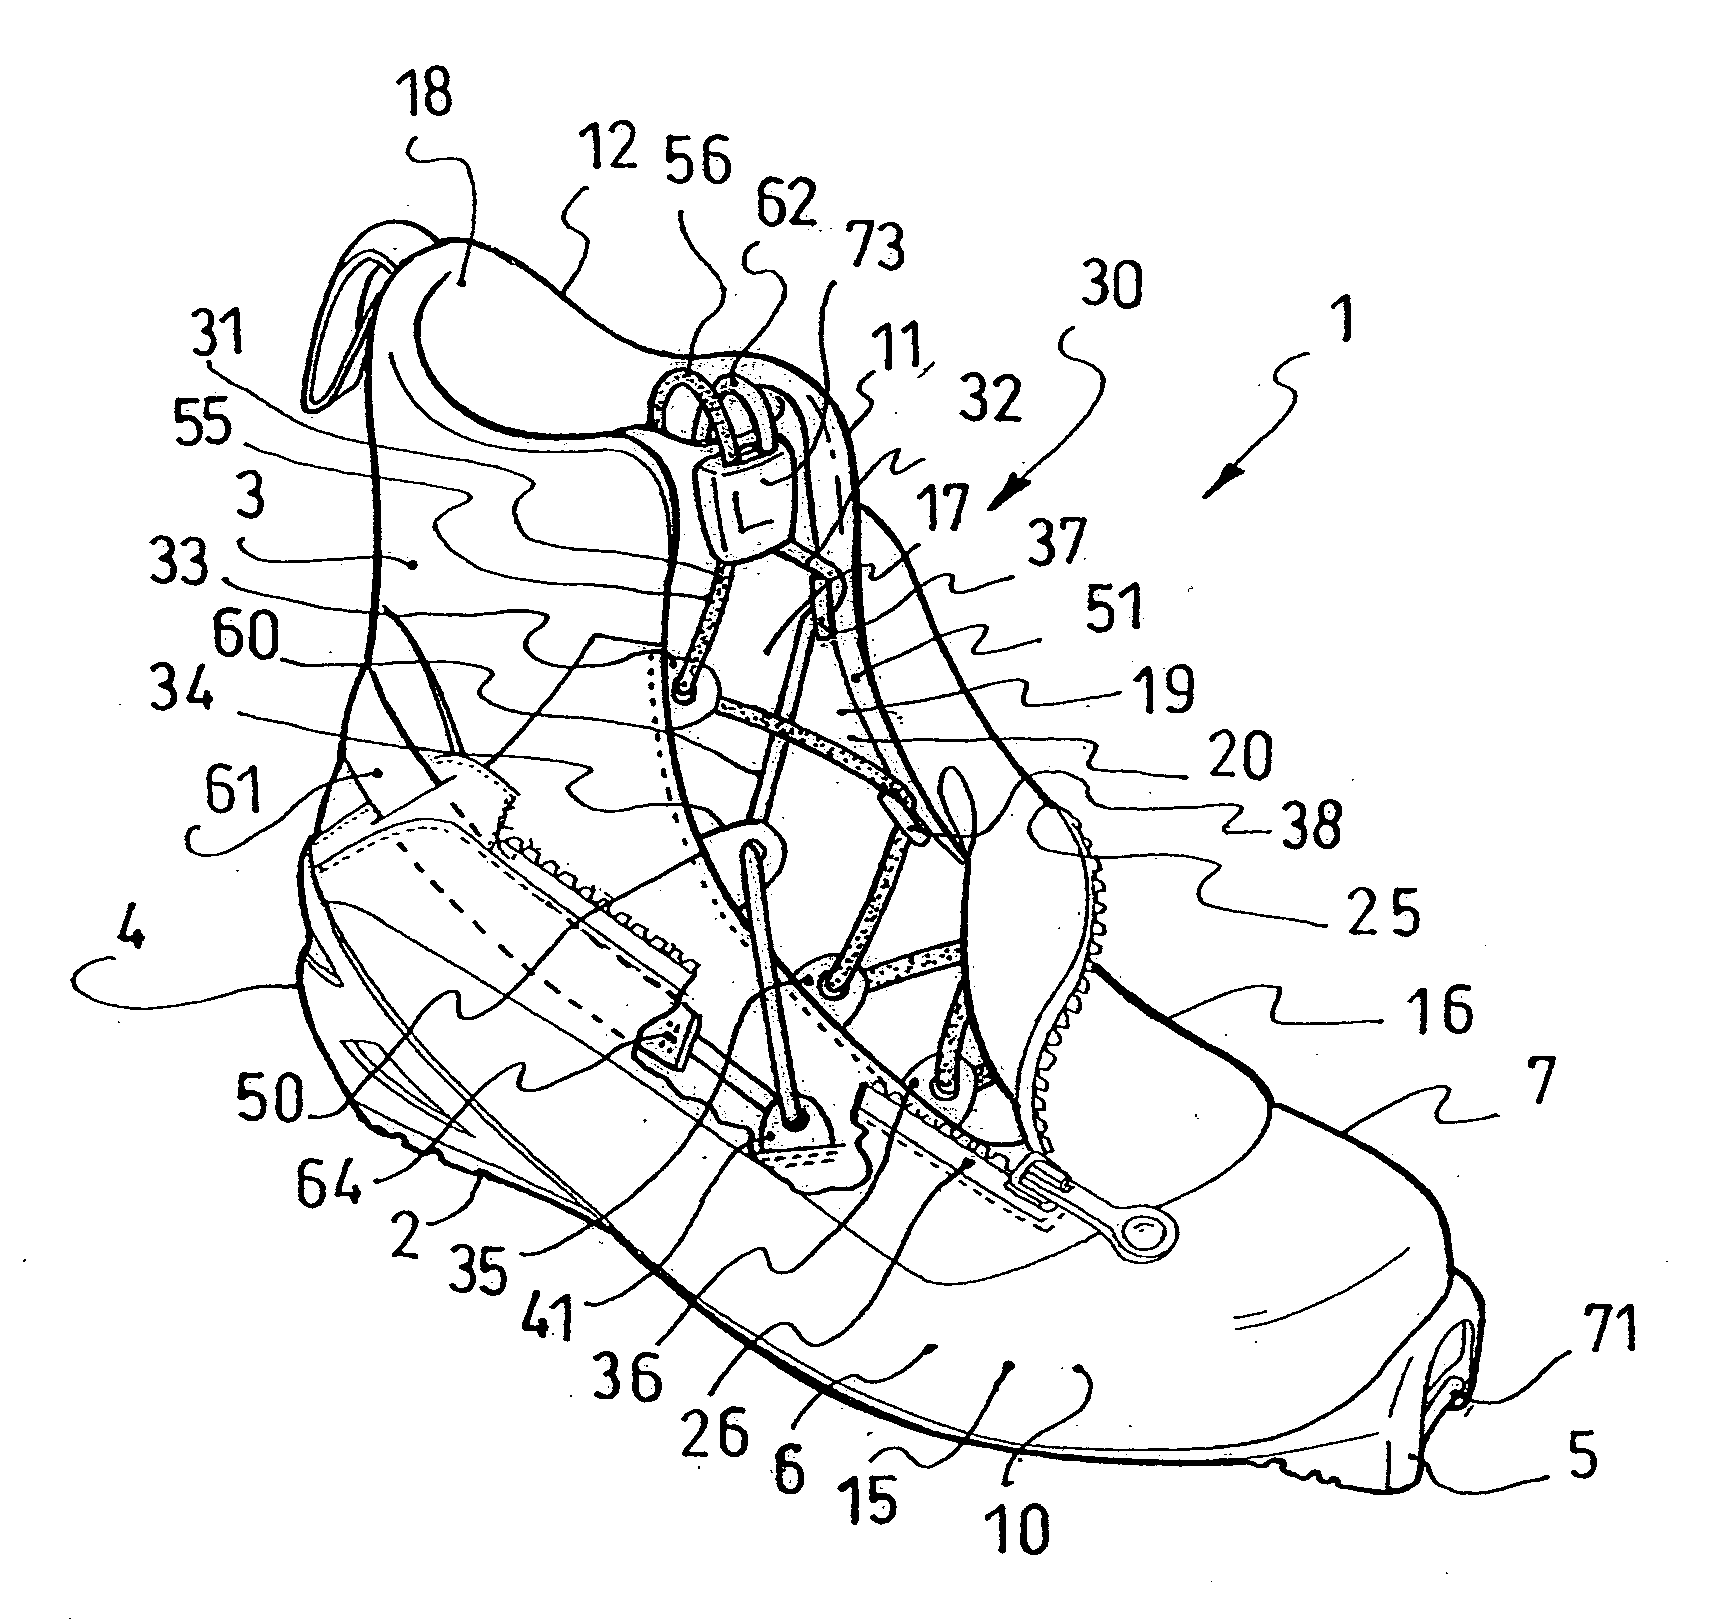 Boot with improved tightening of upper